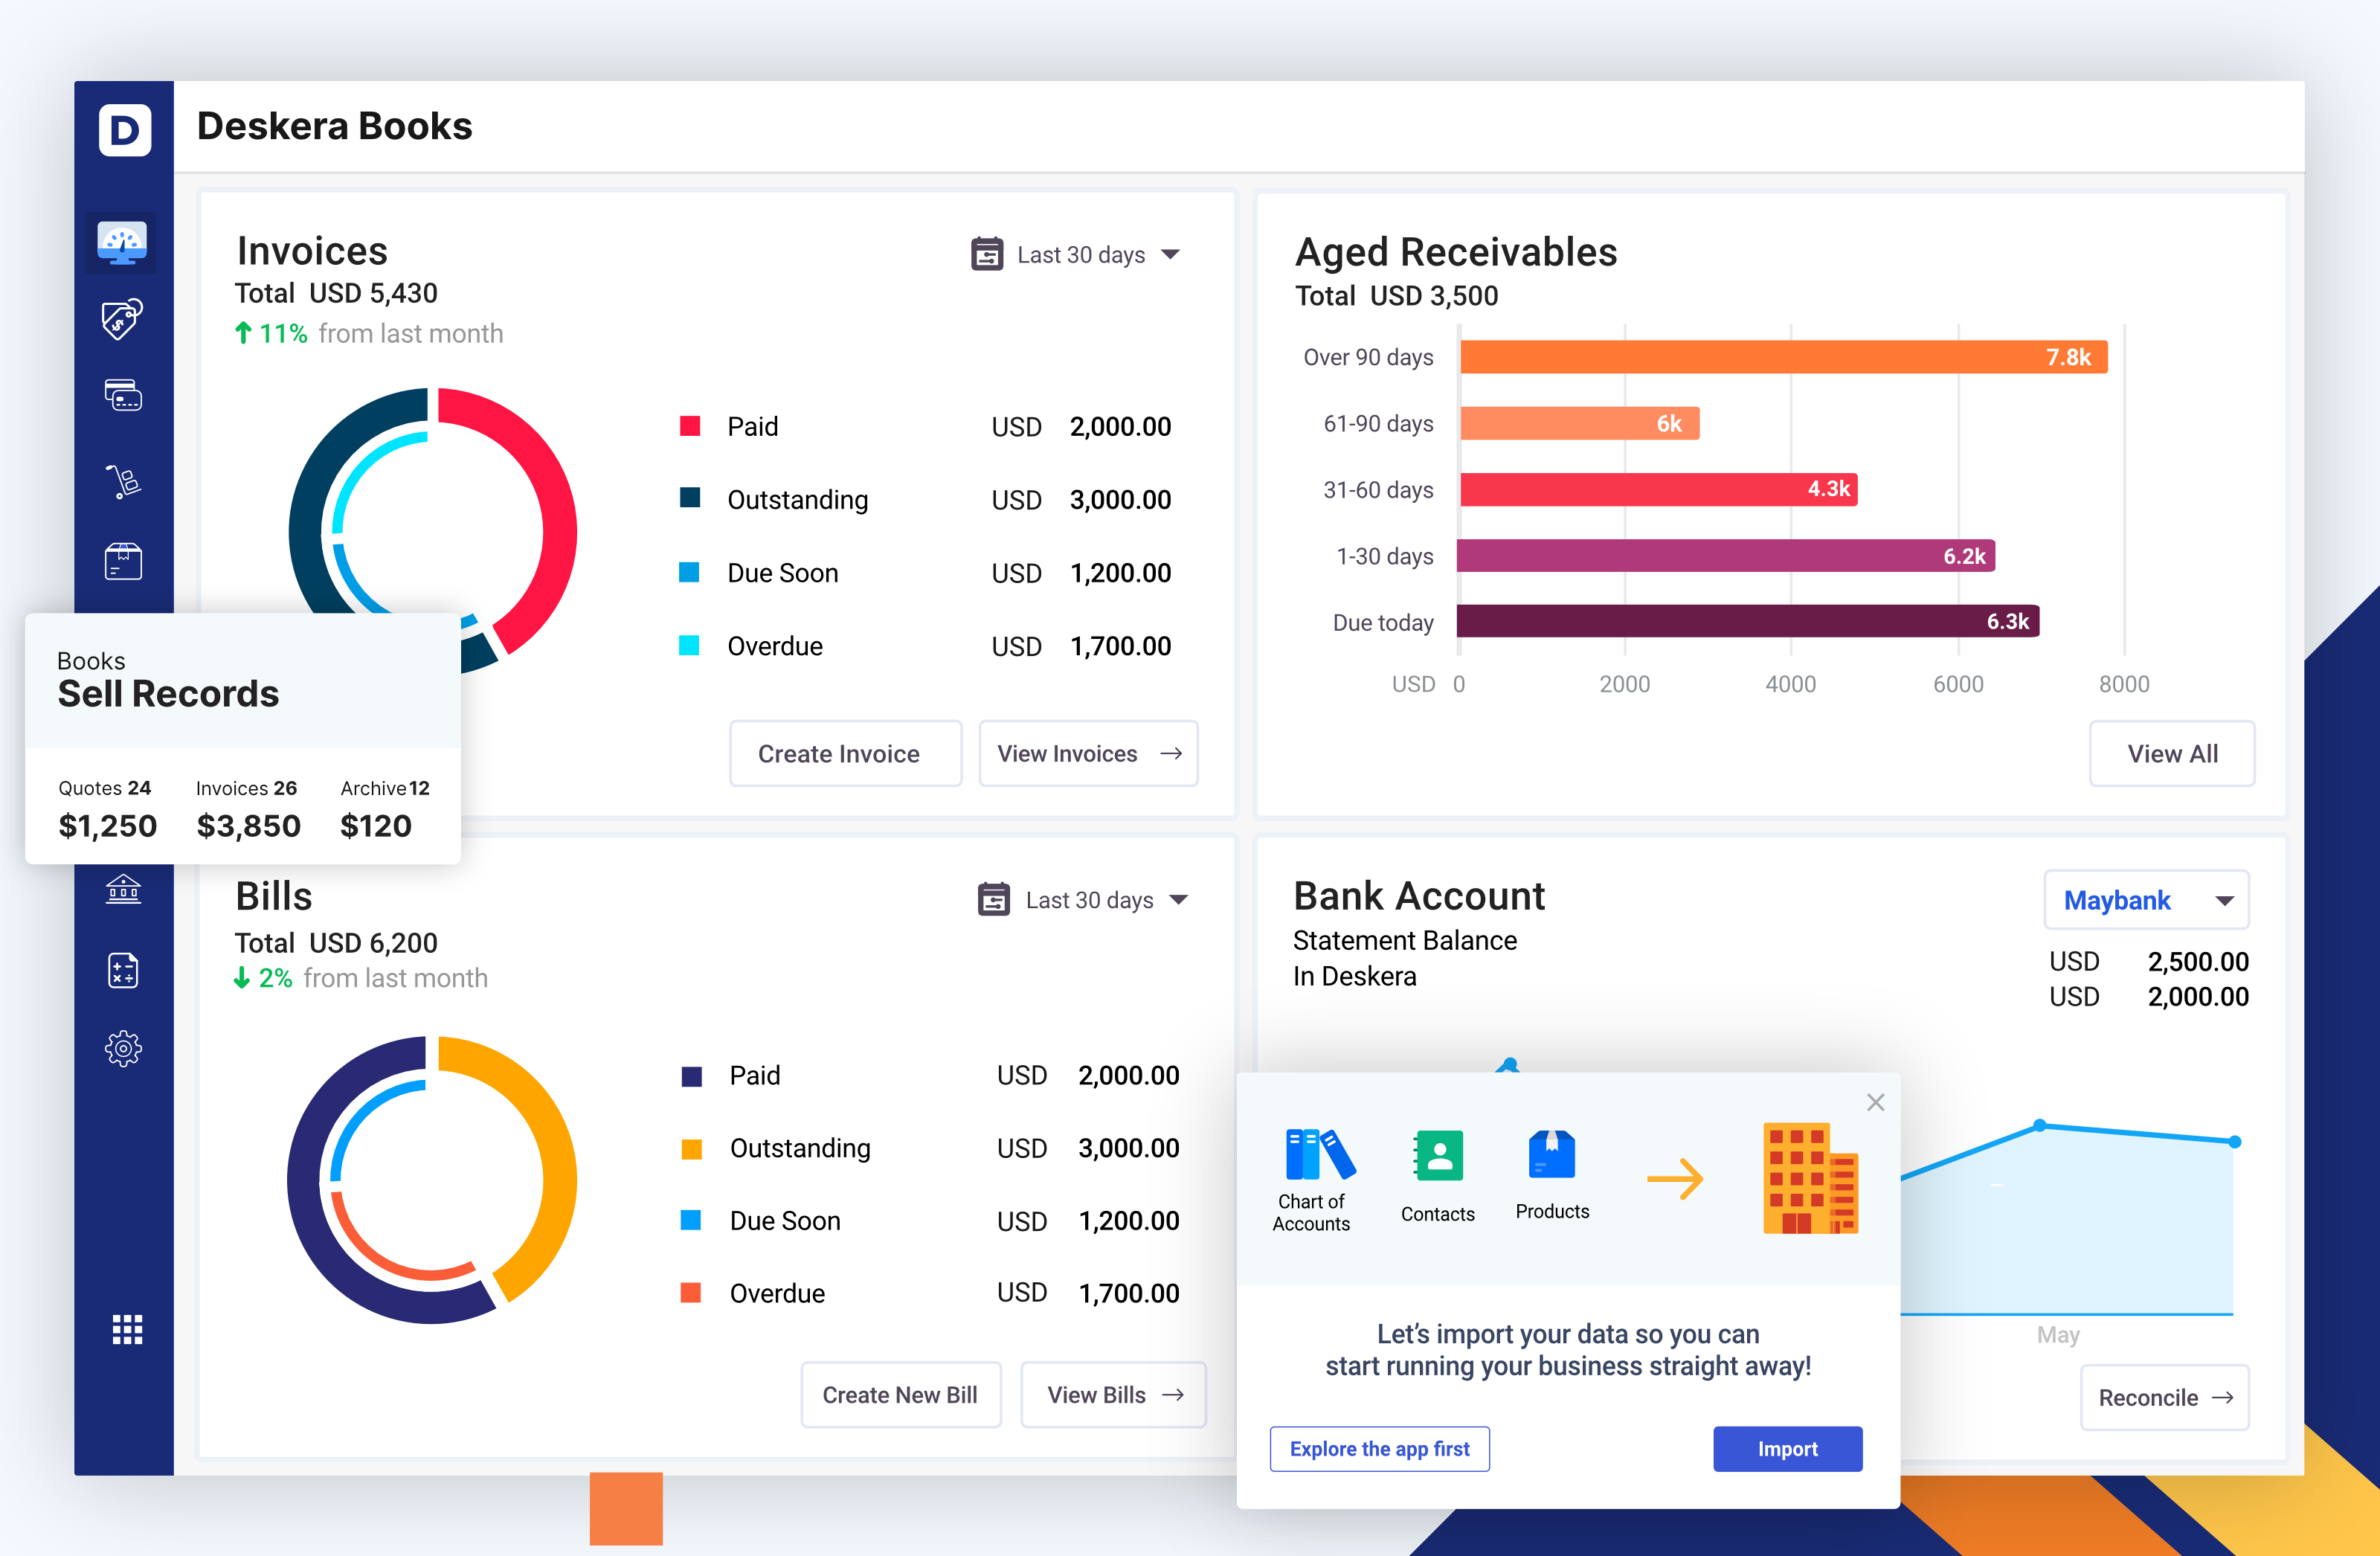 Deskera Books Software - Accounting Dashboard to Visualize Your Key Financial Insights